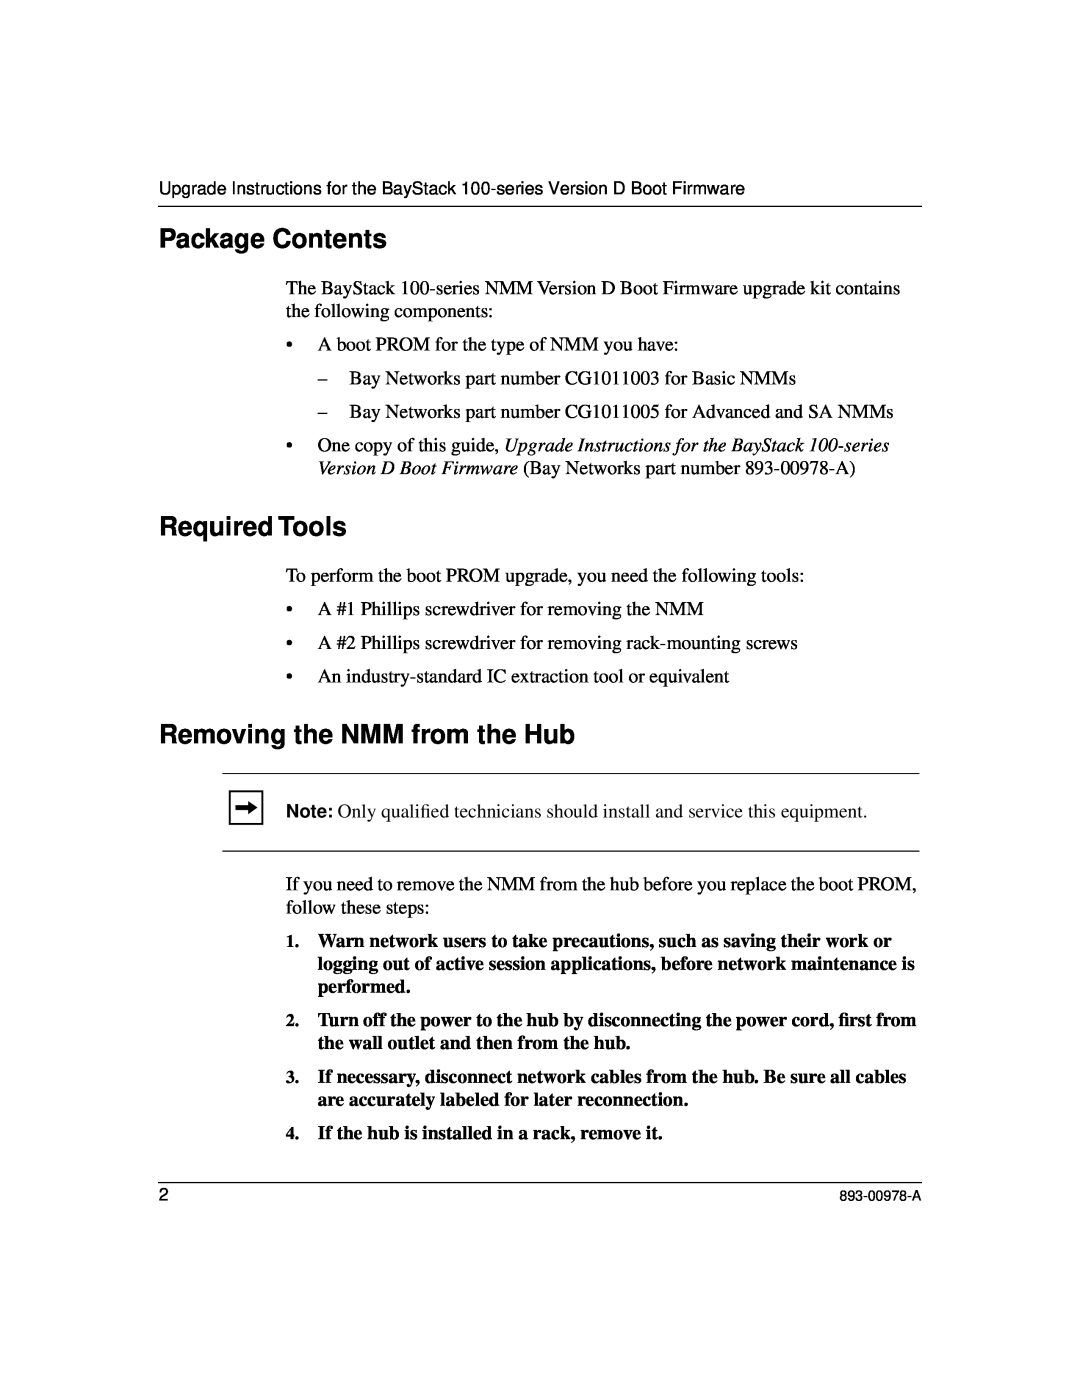 Nortel Networks 100 Series manual Package Contents, Required Tools, Removing the NMM from the Hub 